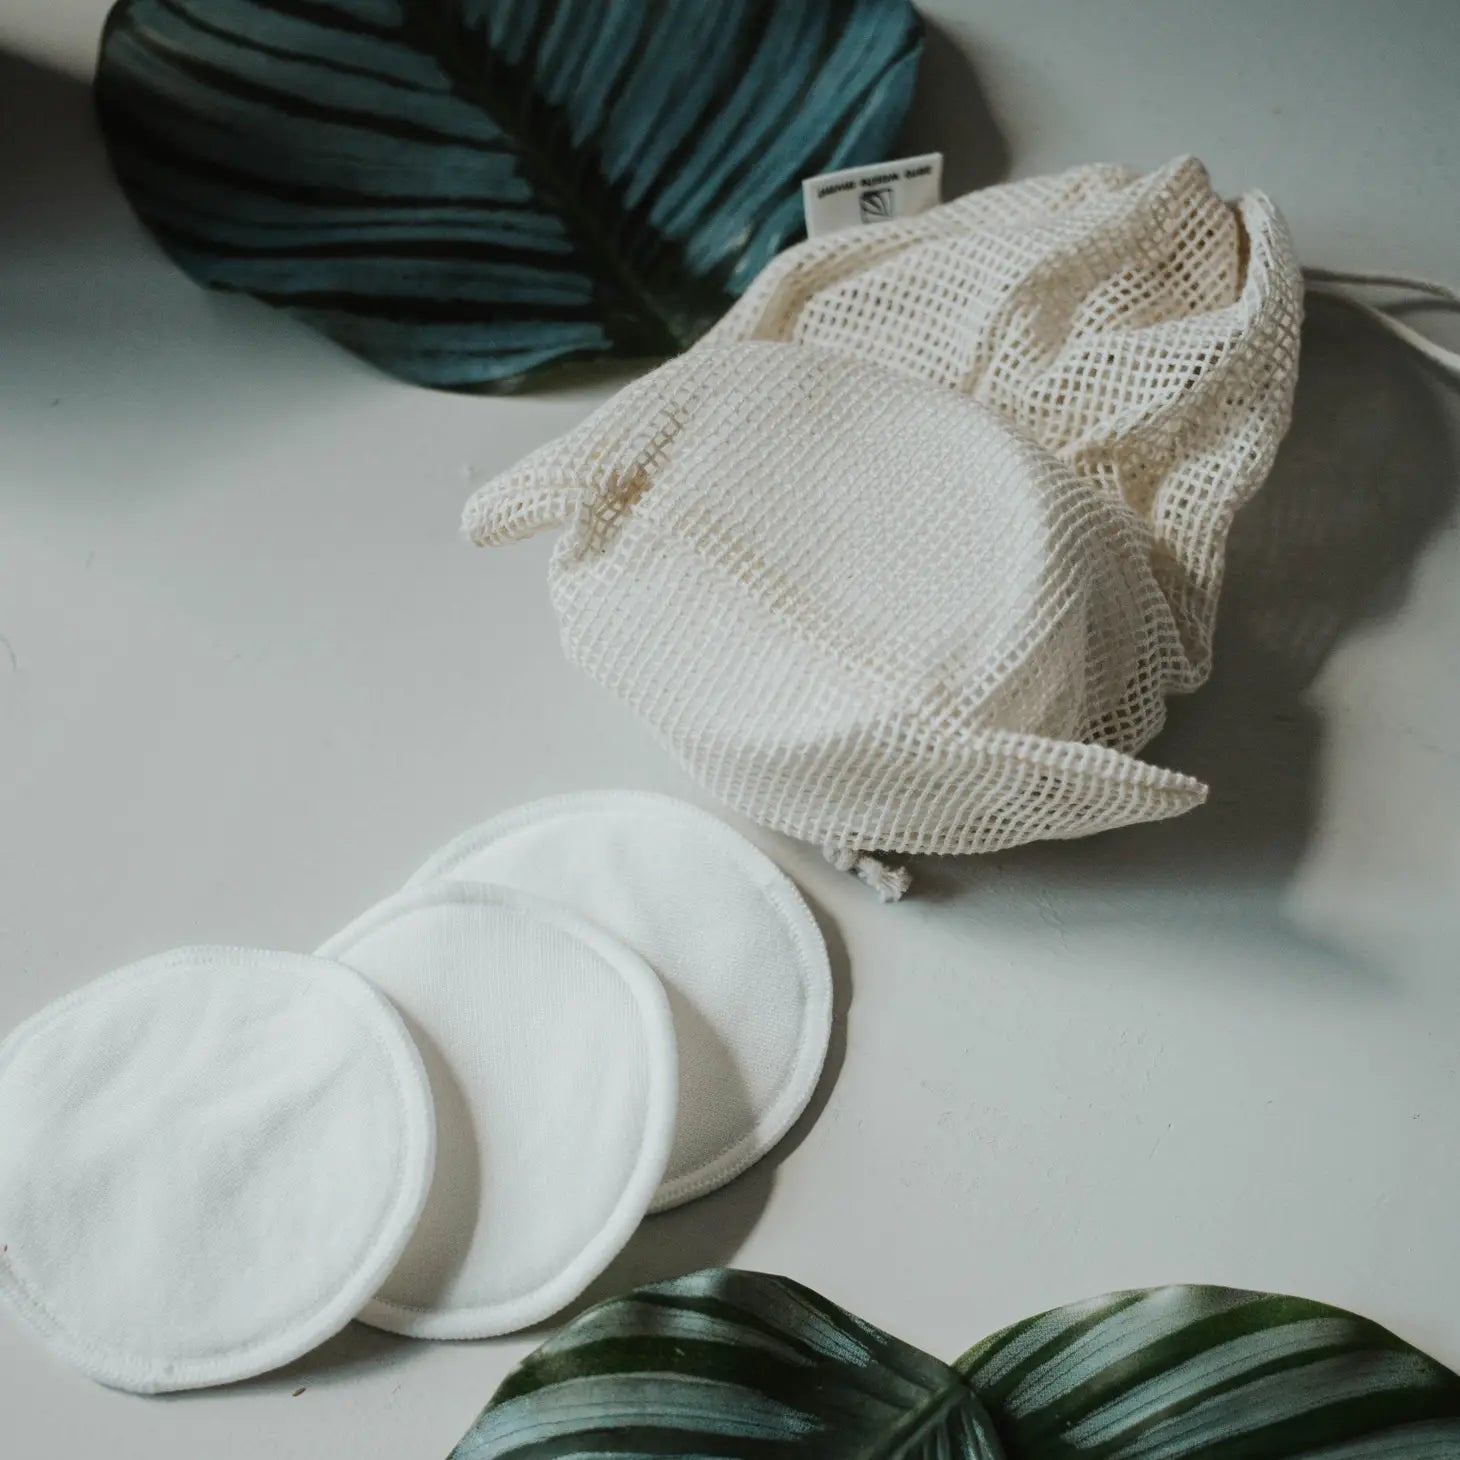 Gentle makeup remover pads that are eco-friendly and have three layers for a refreshed and gentle skincare routine.